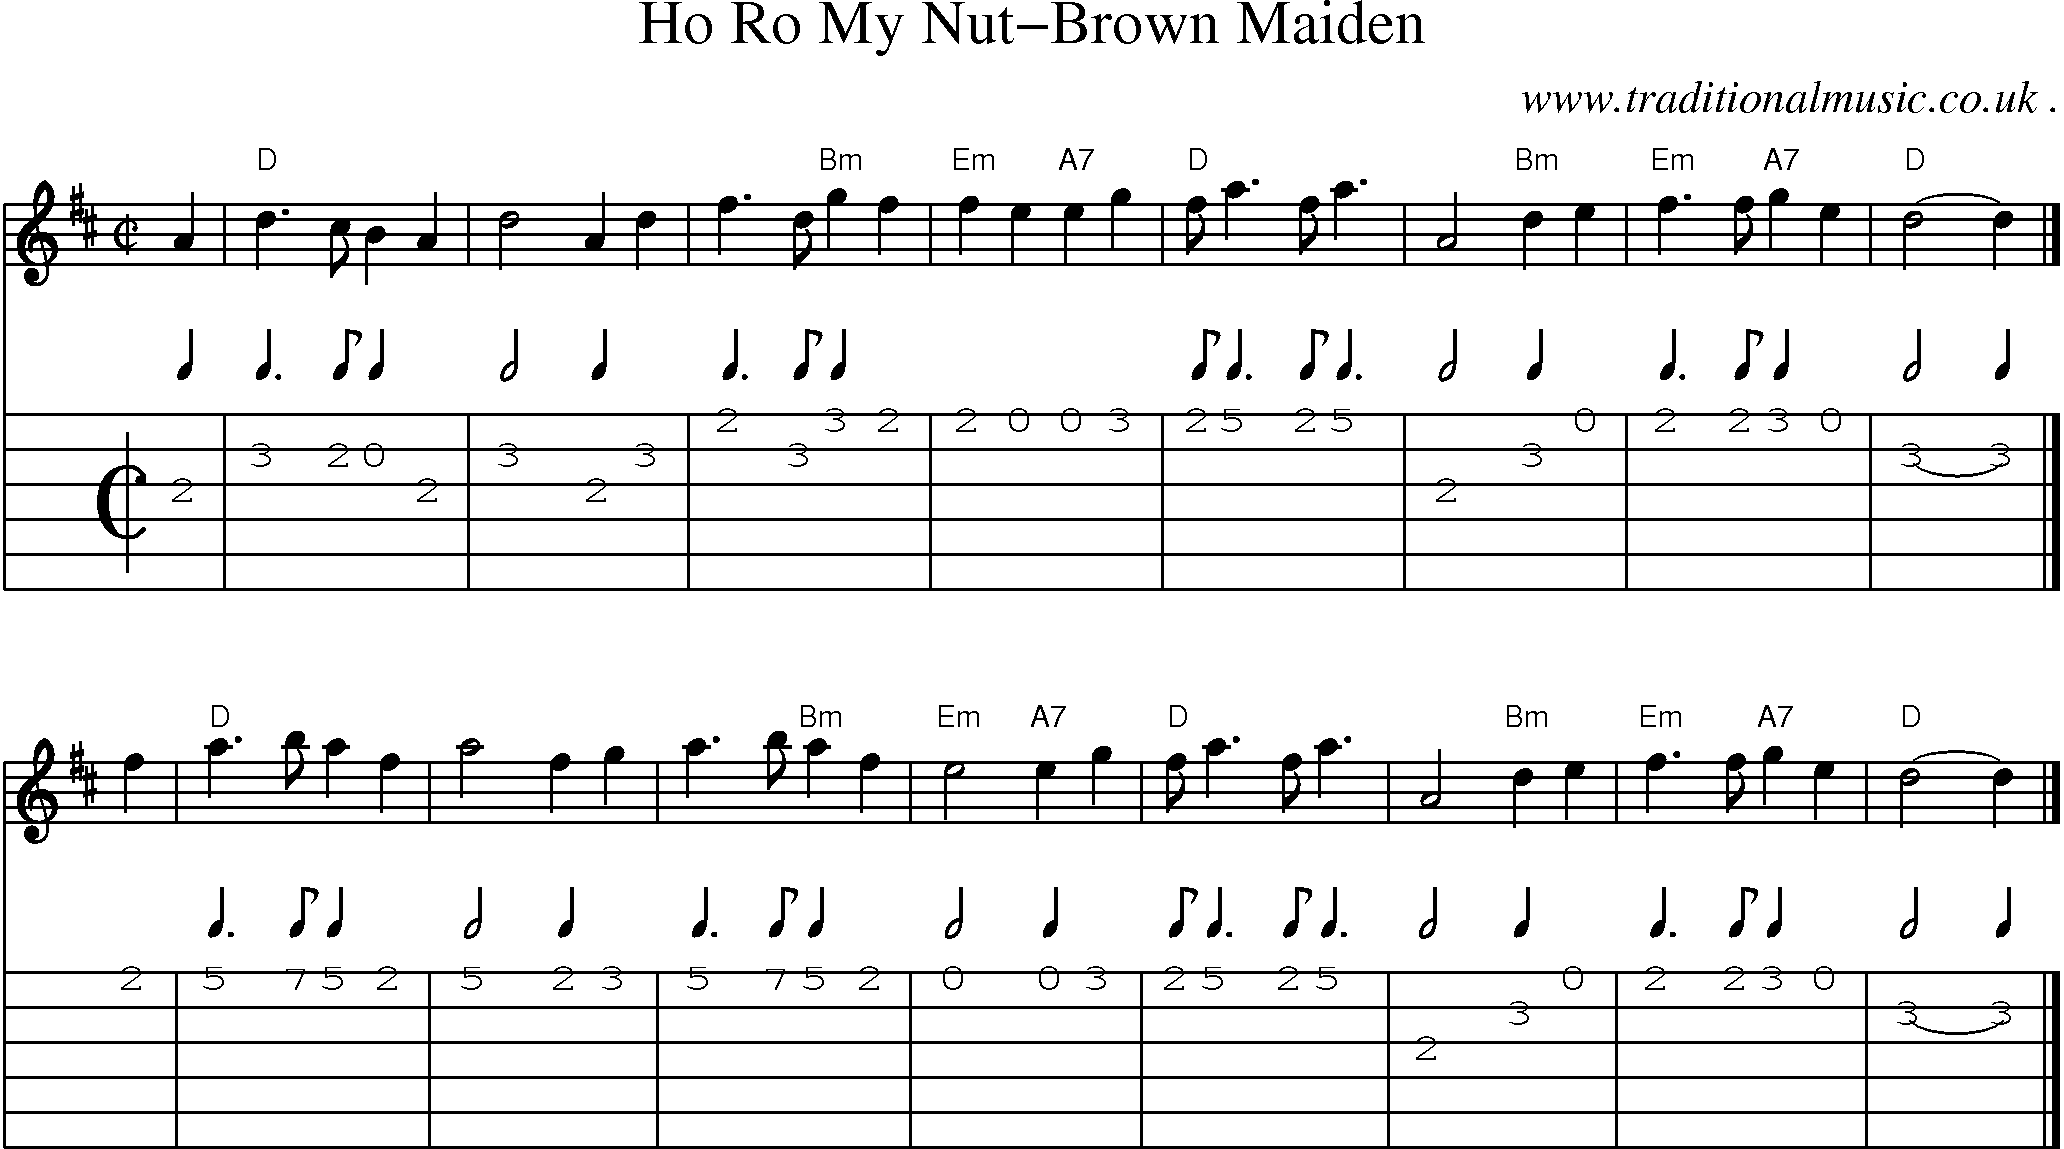 Sheet-music  score, Chords and Guitar Tabs for Ho Ro My Nut-brown Maiden